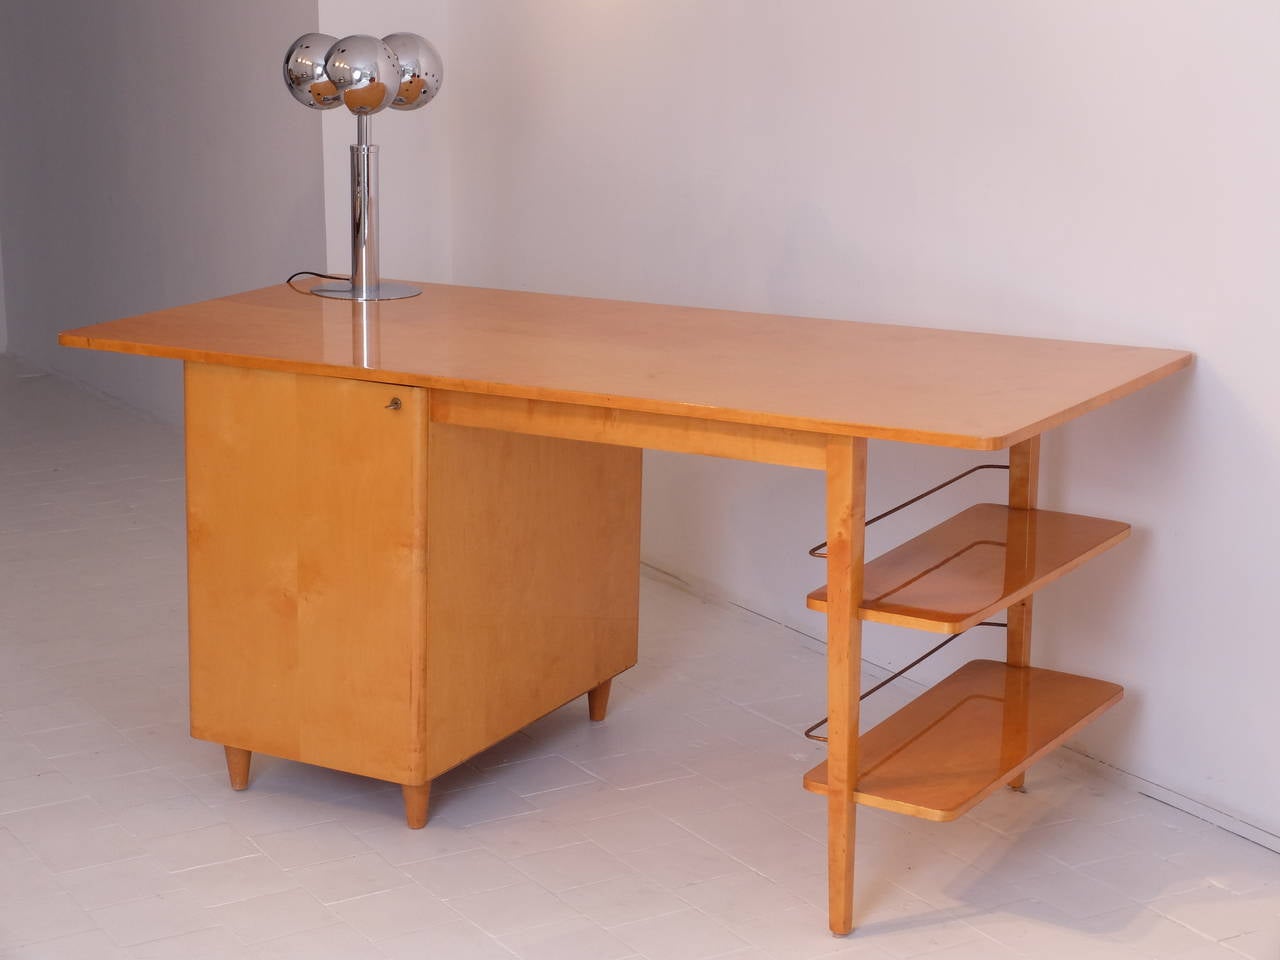 Mid-Century Double-Sided Executive Birch Desk Imexcotra
Mid-Century desk was manufactured in Belgium by Imexcotra, during the 1950s.
Imexcotra was a Belgian company, founded after WWII, which produced designer furniture in the 50s and 60s. They were